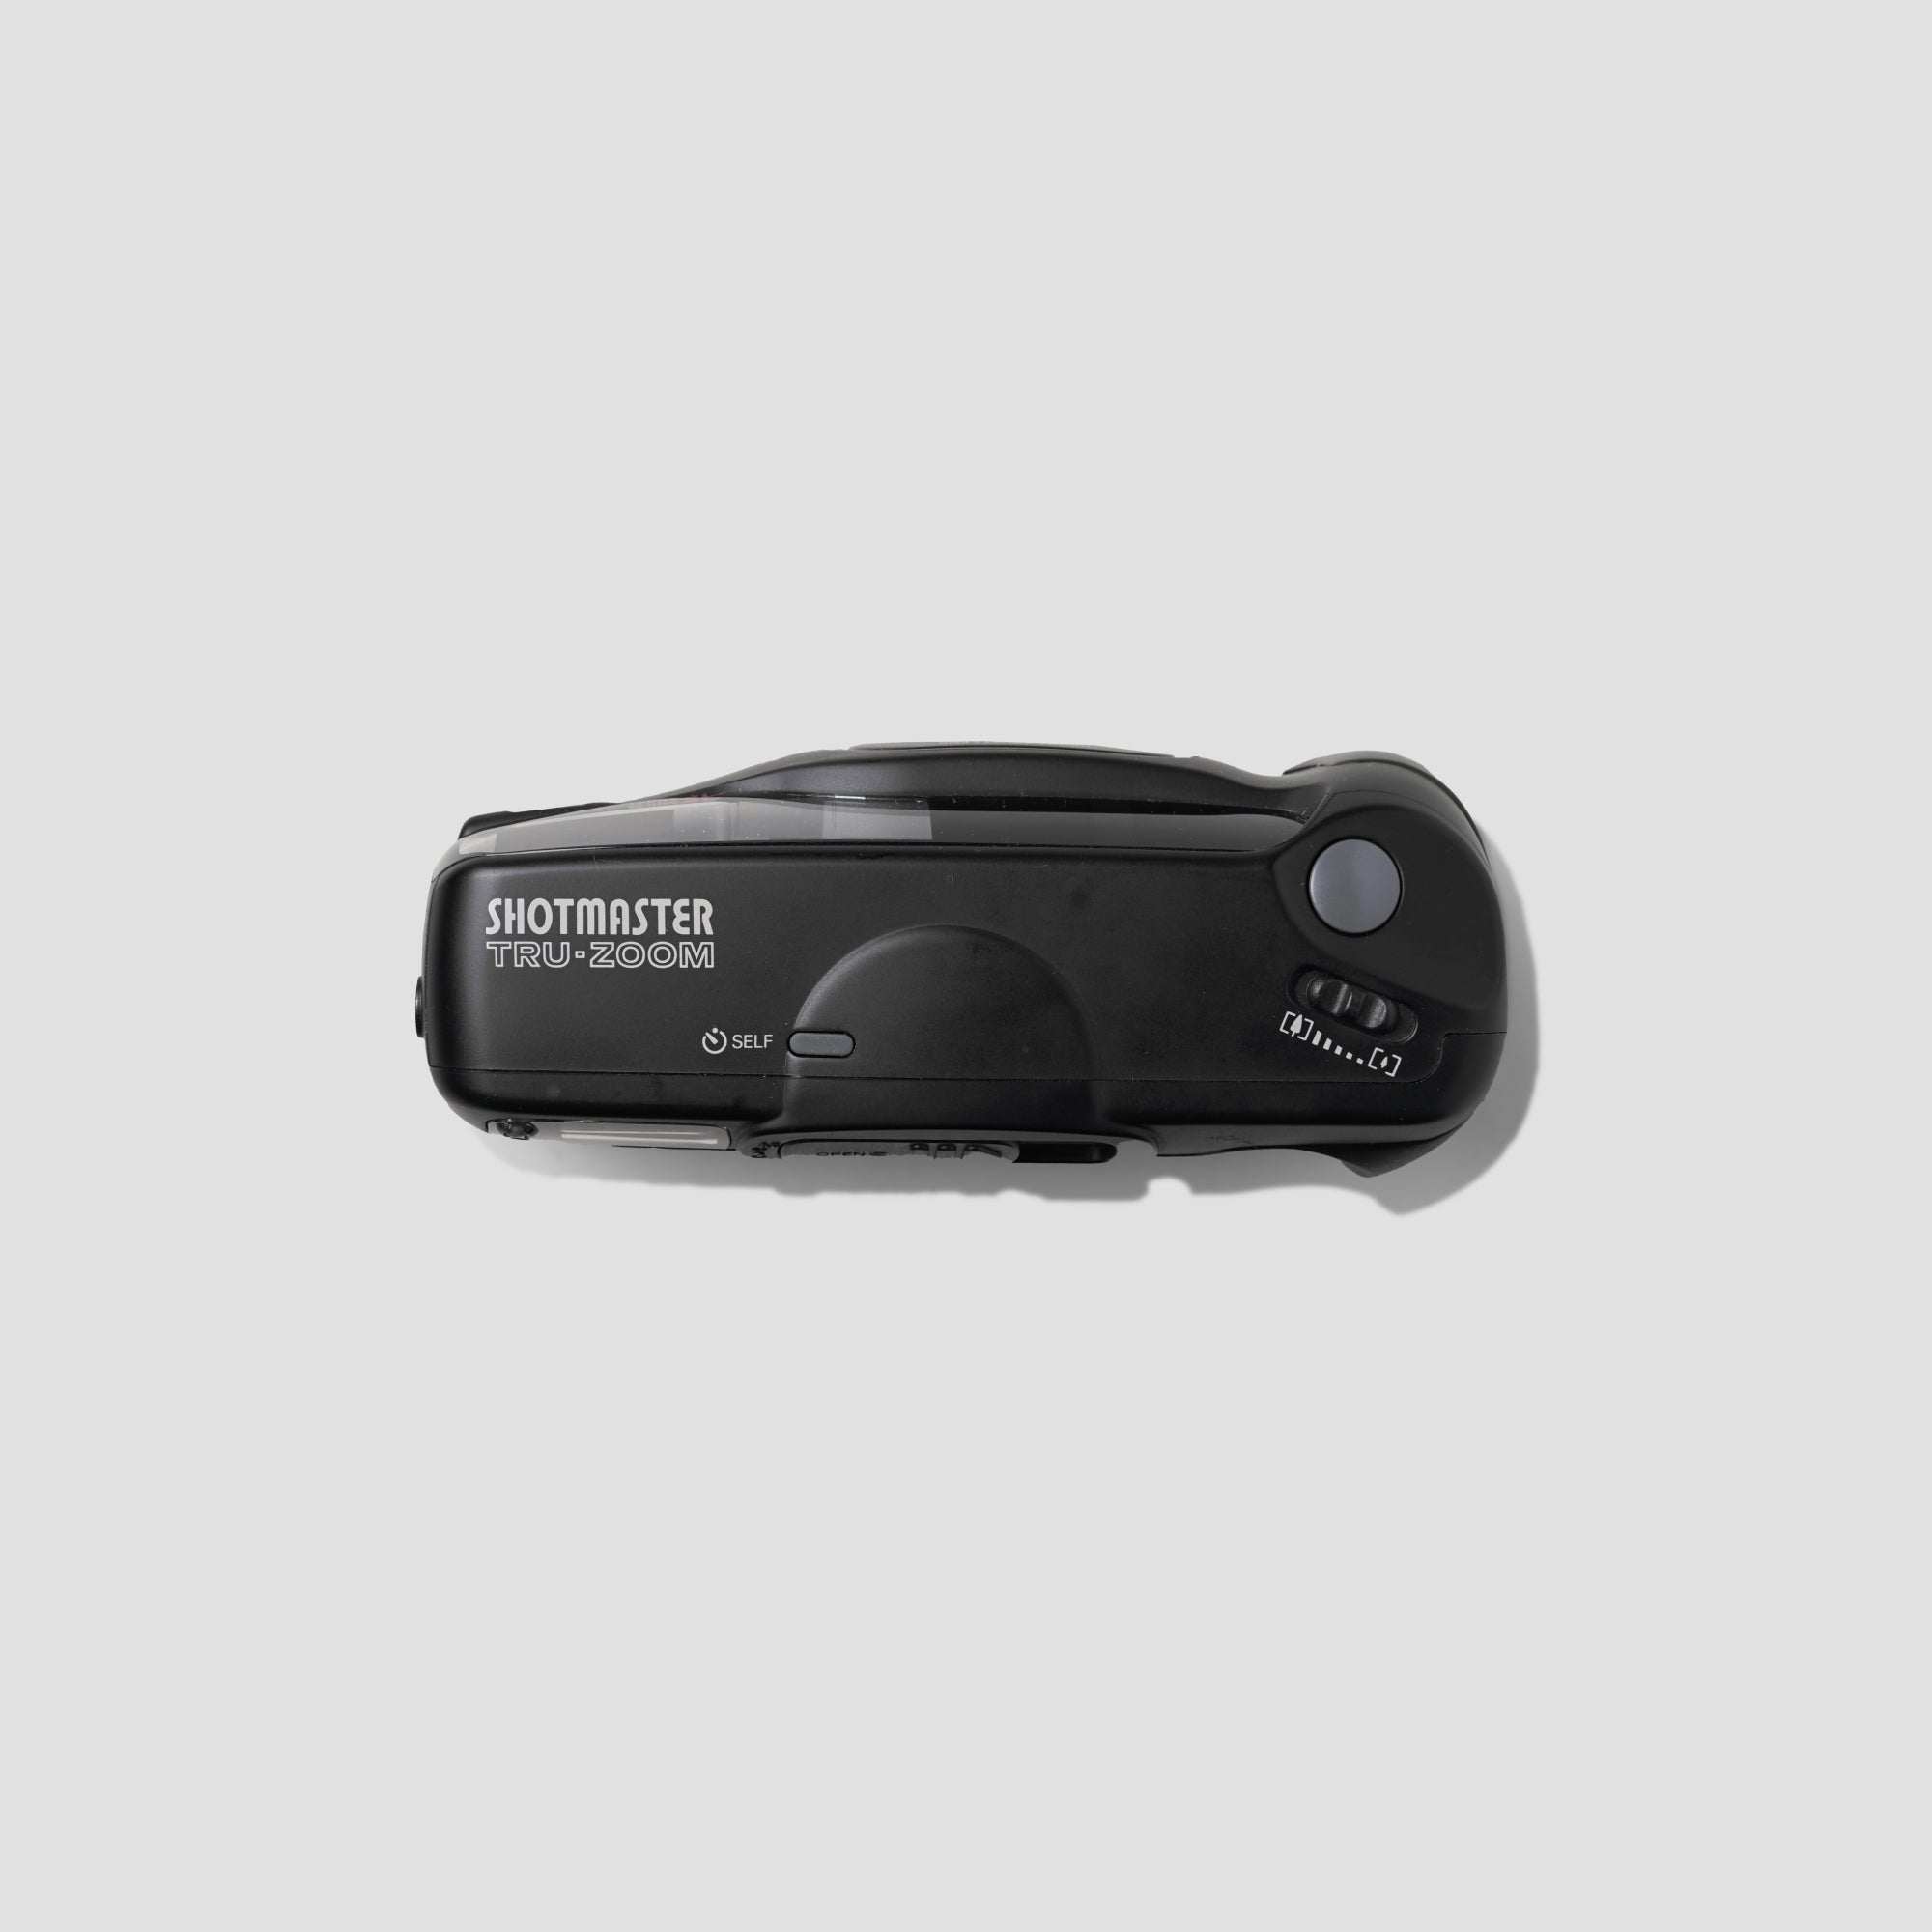 Buy Ricoh Shotmaster Tru-Zoom now at Analogue Amsterdam